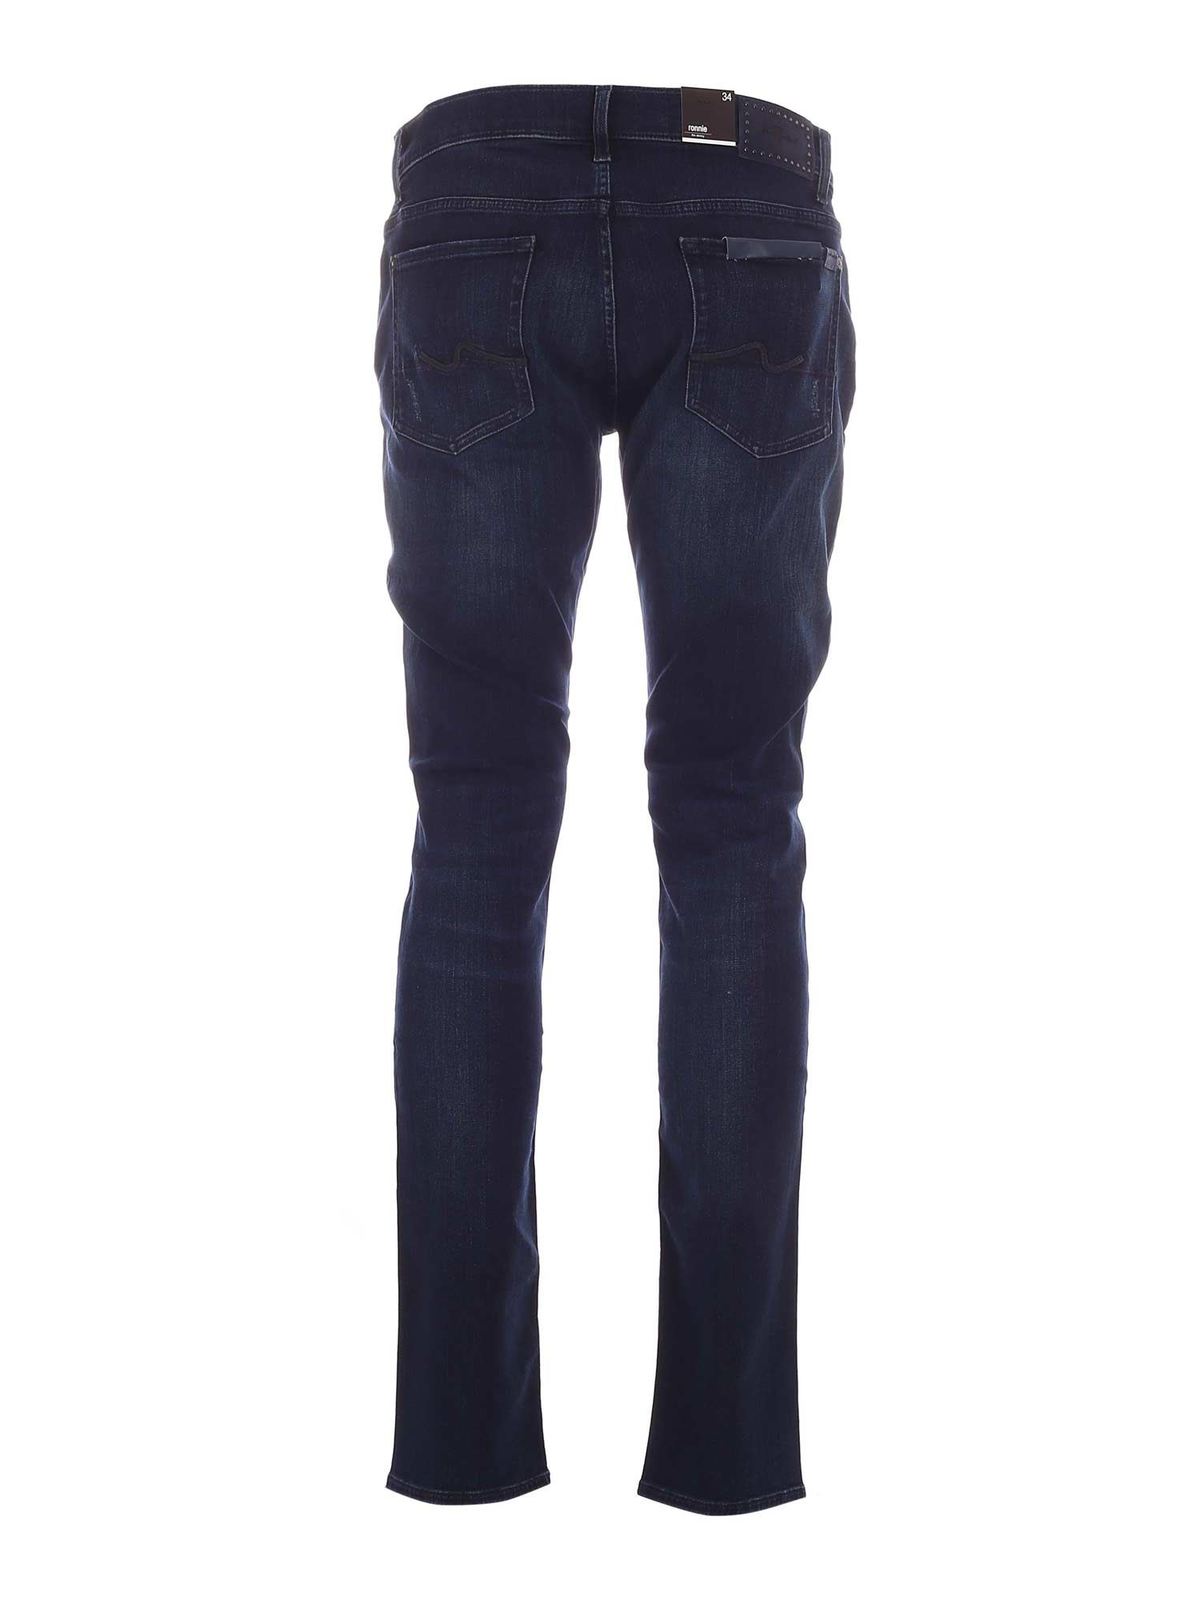 Straight leg jeans 7 For All Mankind - Special Edition Ronnie jeans in ...